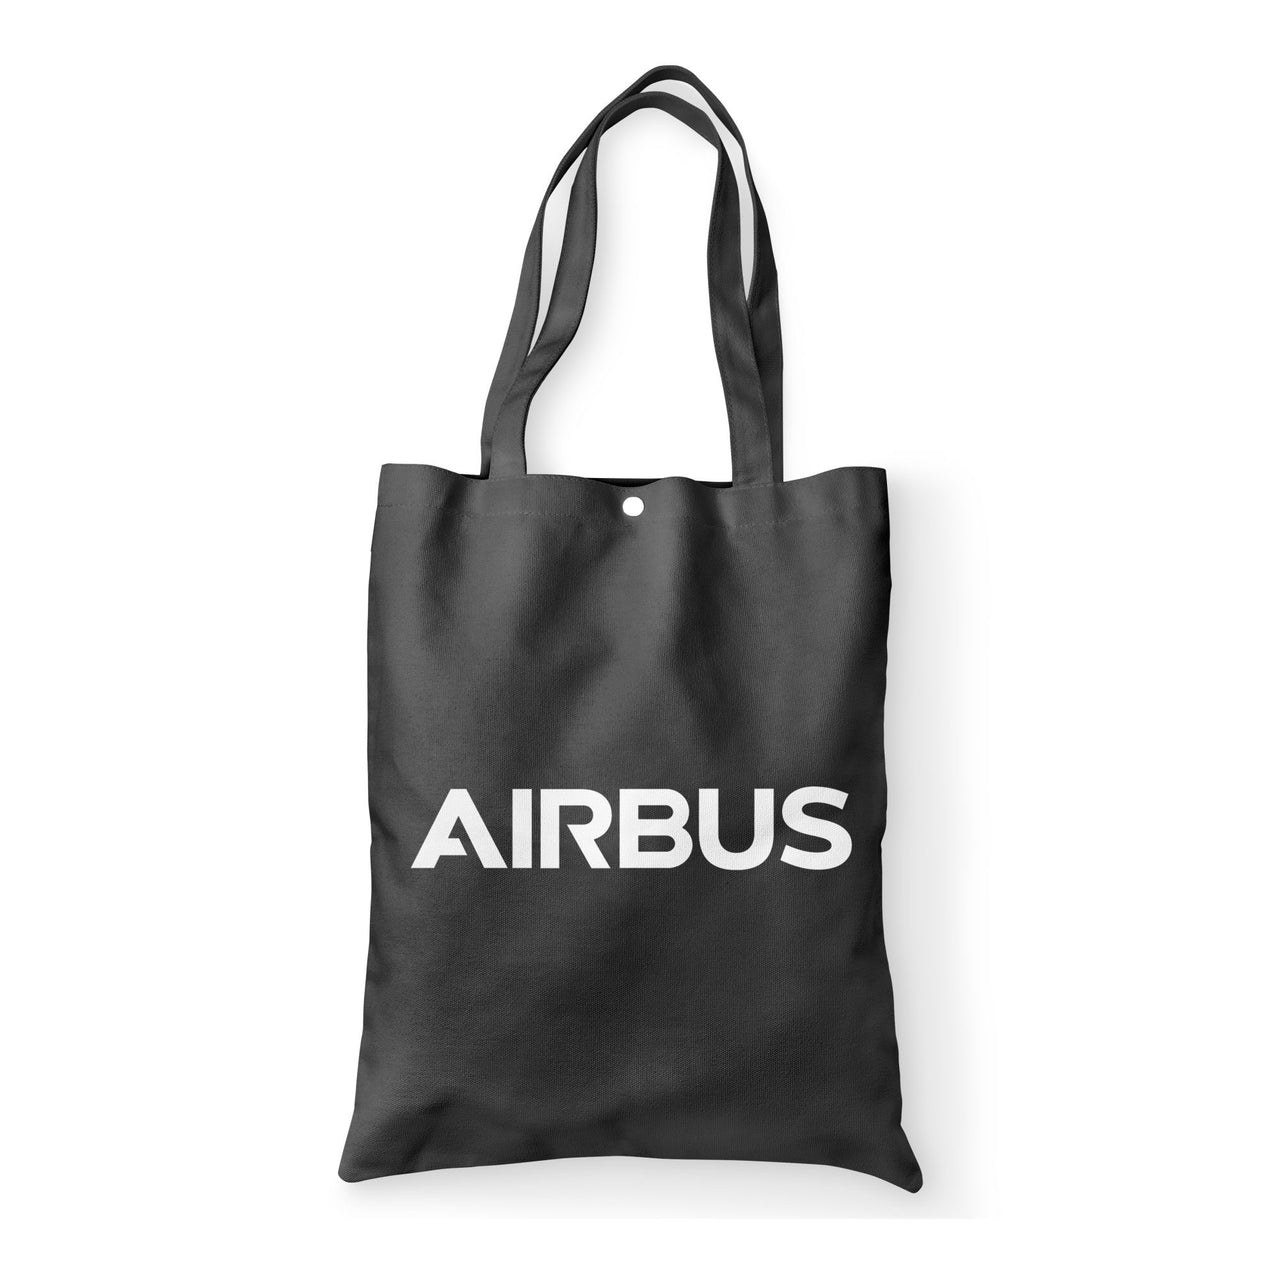 Airbus & Text Designed Tote Bags